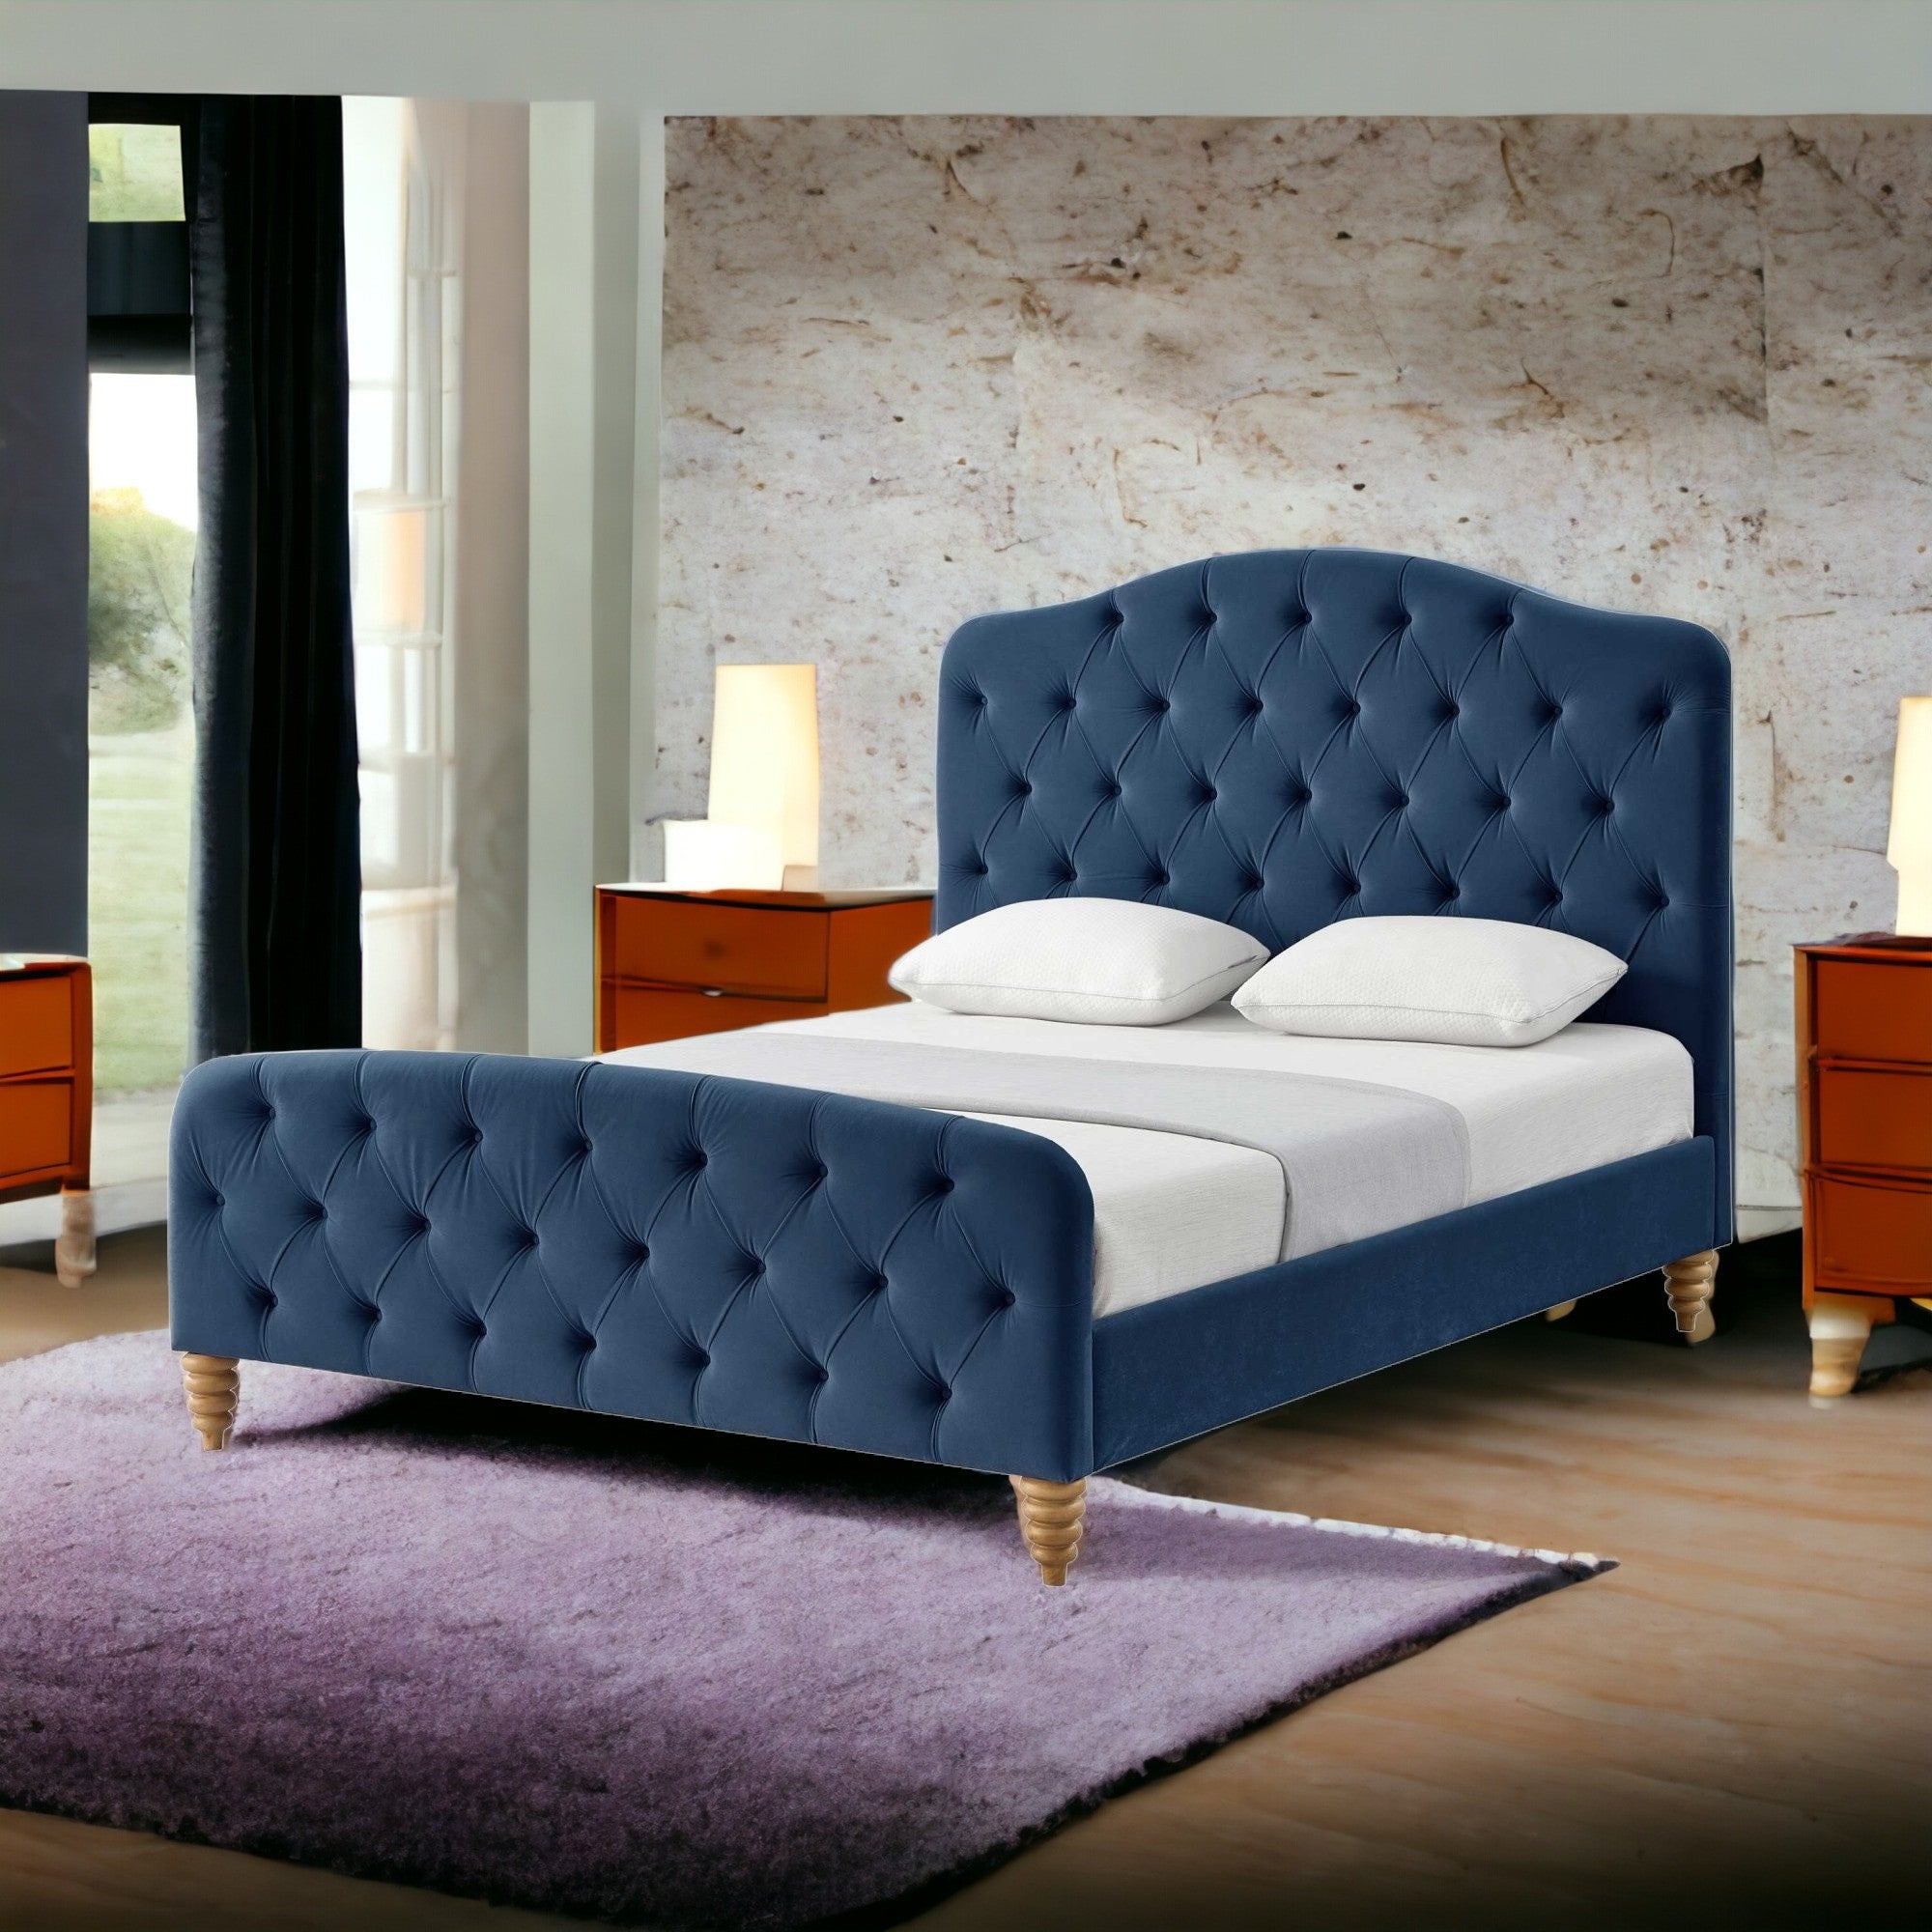 Gray Solid Wood Twin Tufted Upholstered Velvet Bed